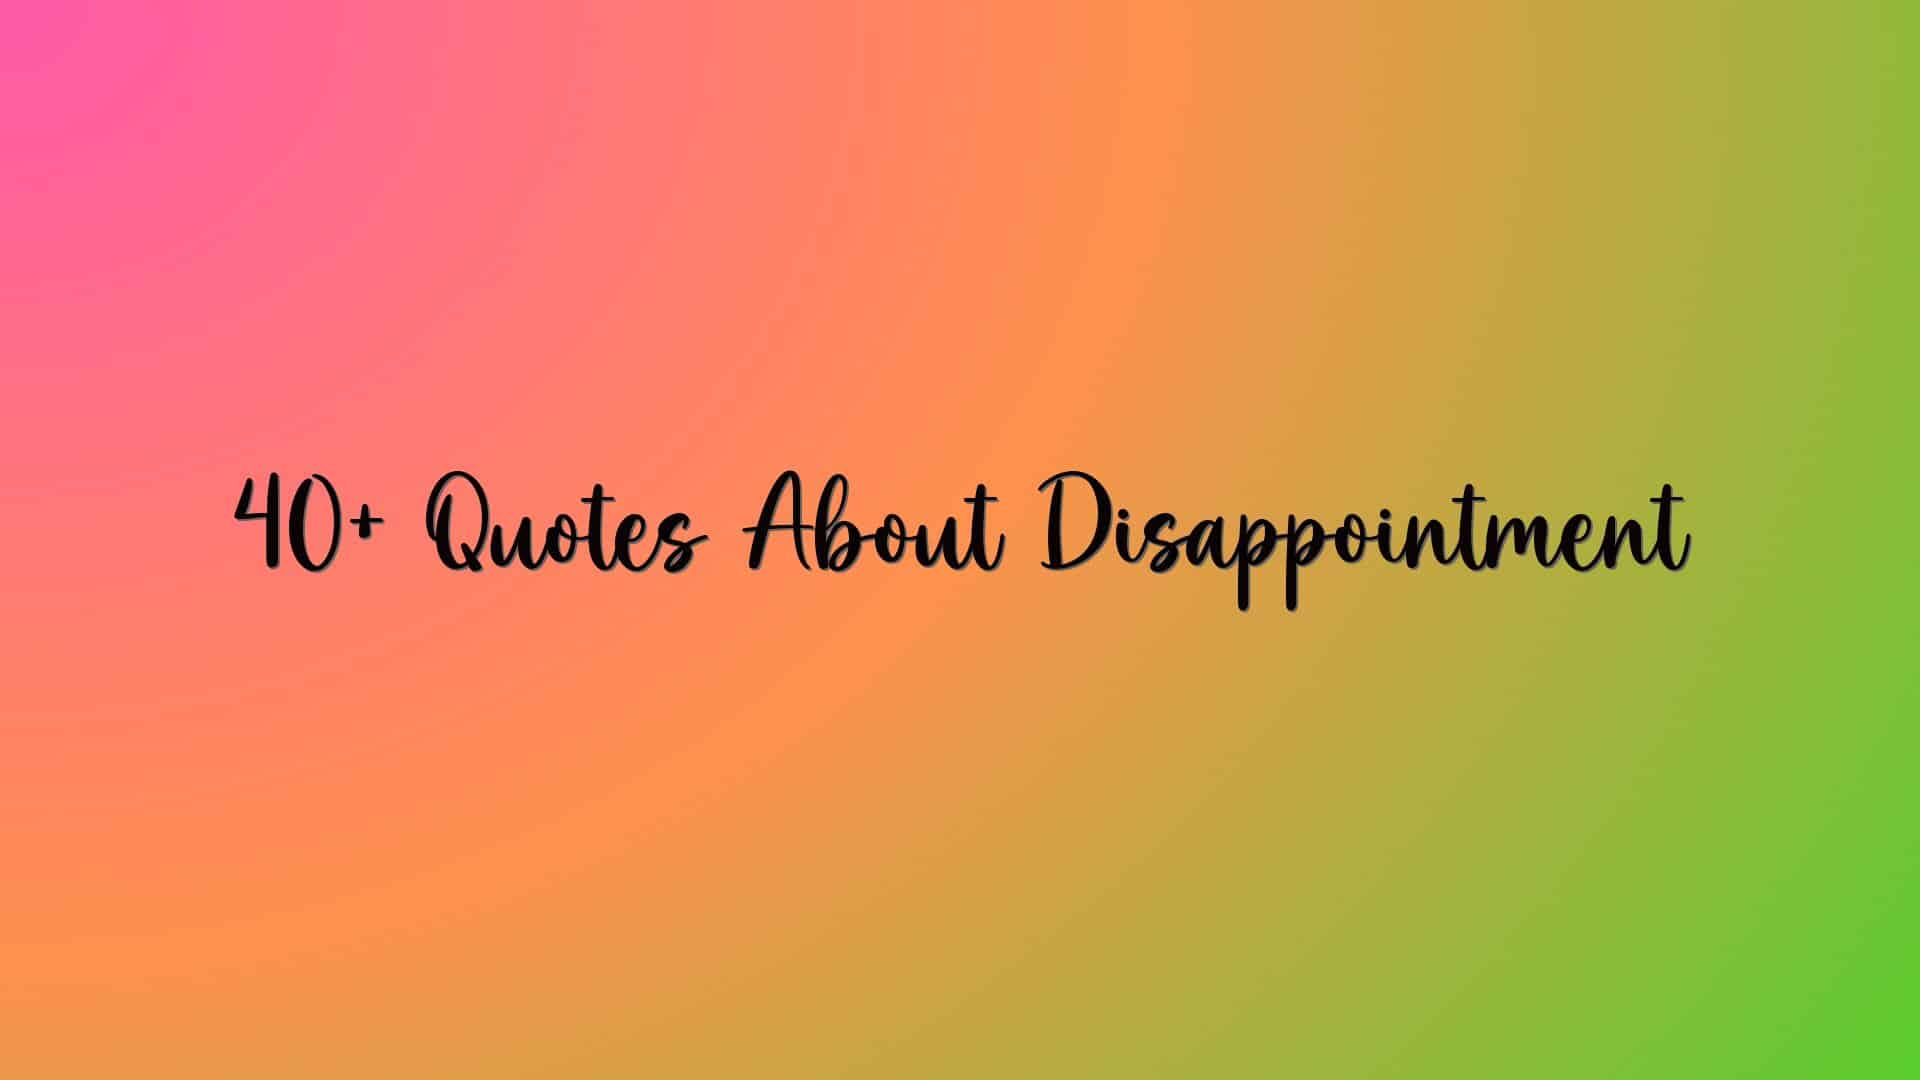 40+ Quotes About Disappointment